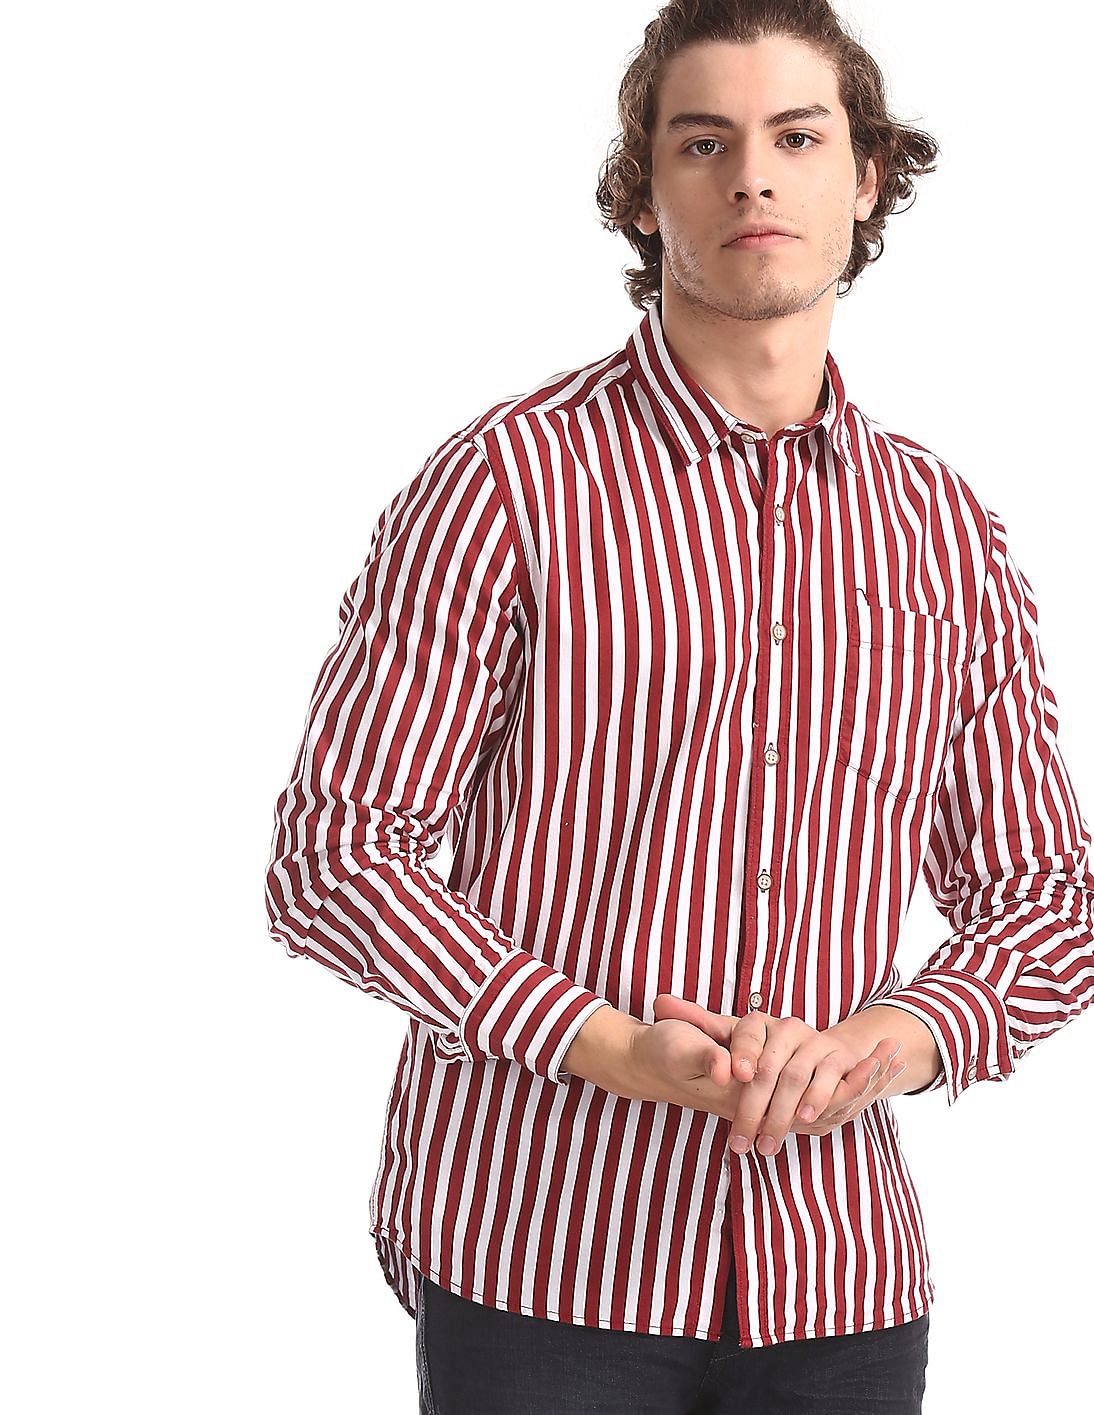 Buy Men Red And White Vertical Stripe Cotton Shirt online at NNNOW.com